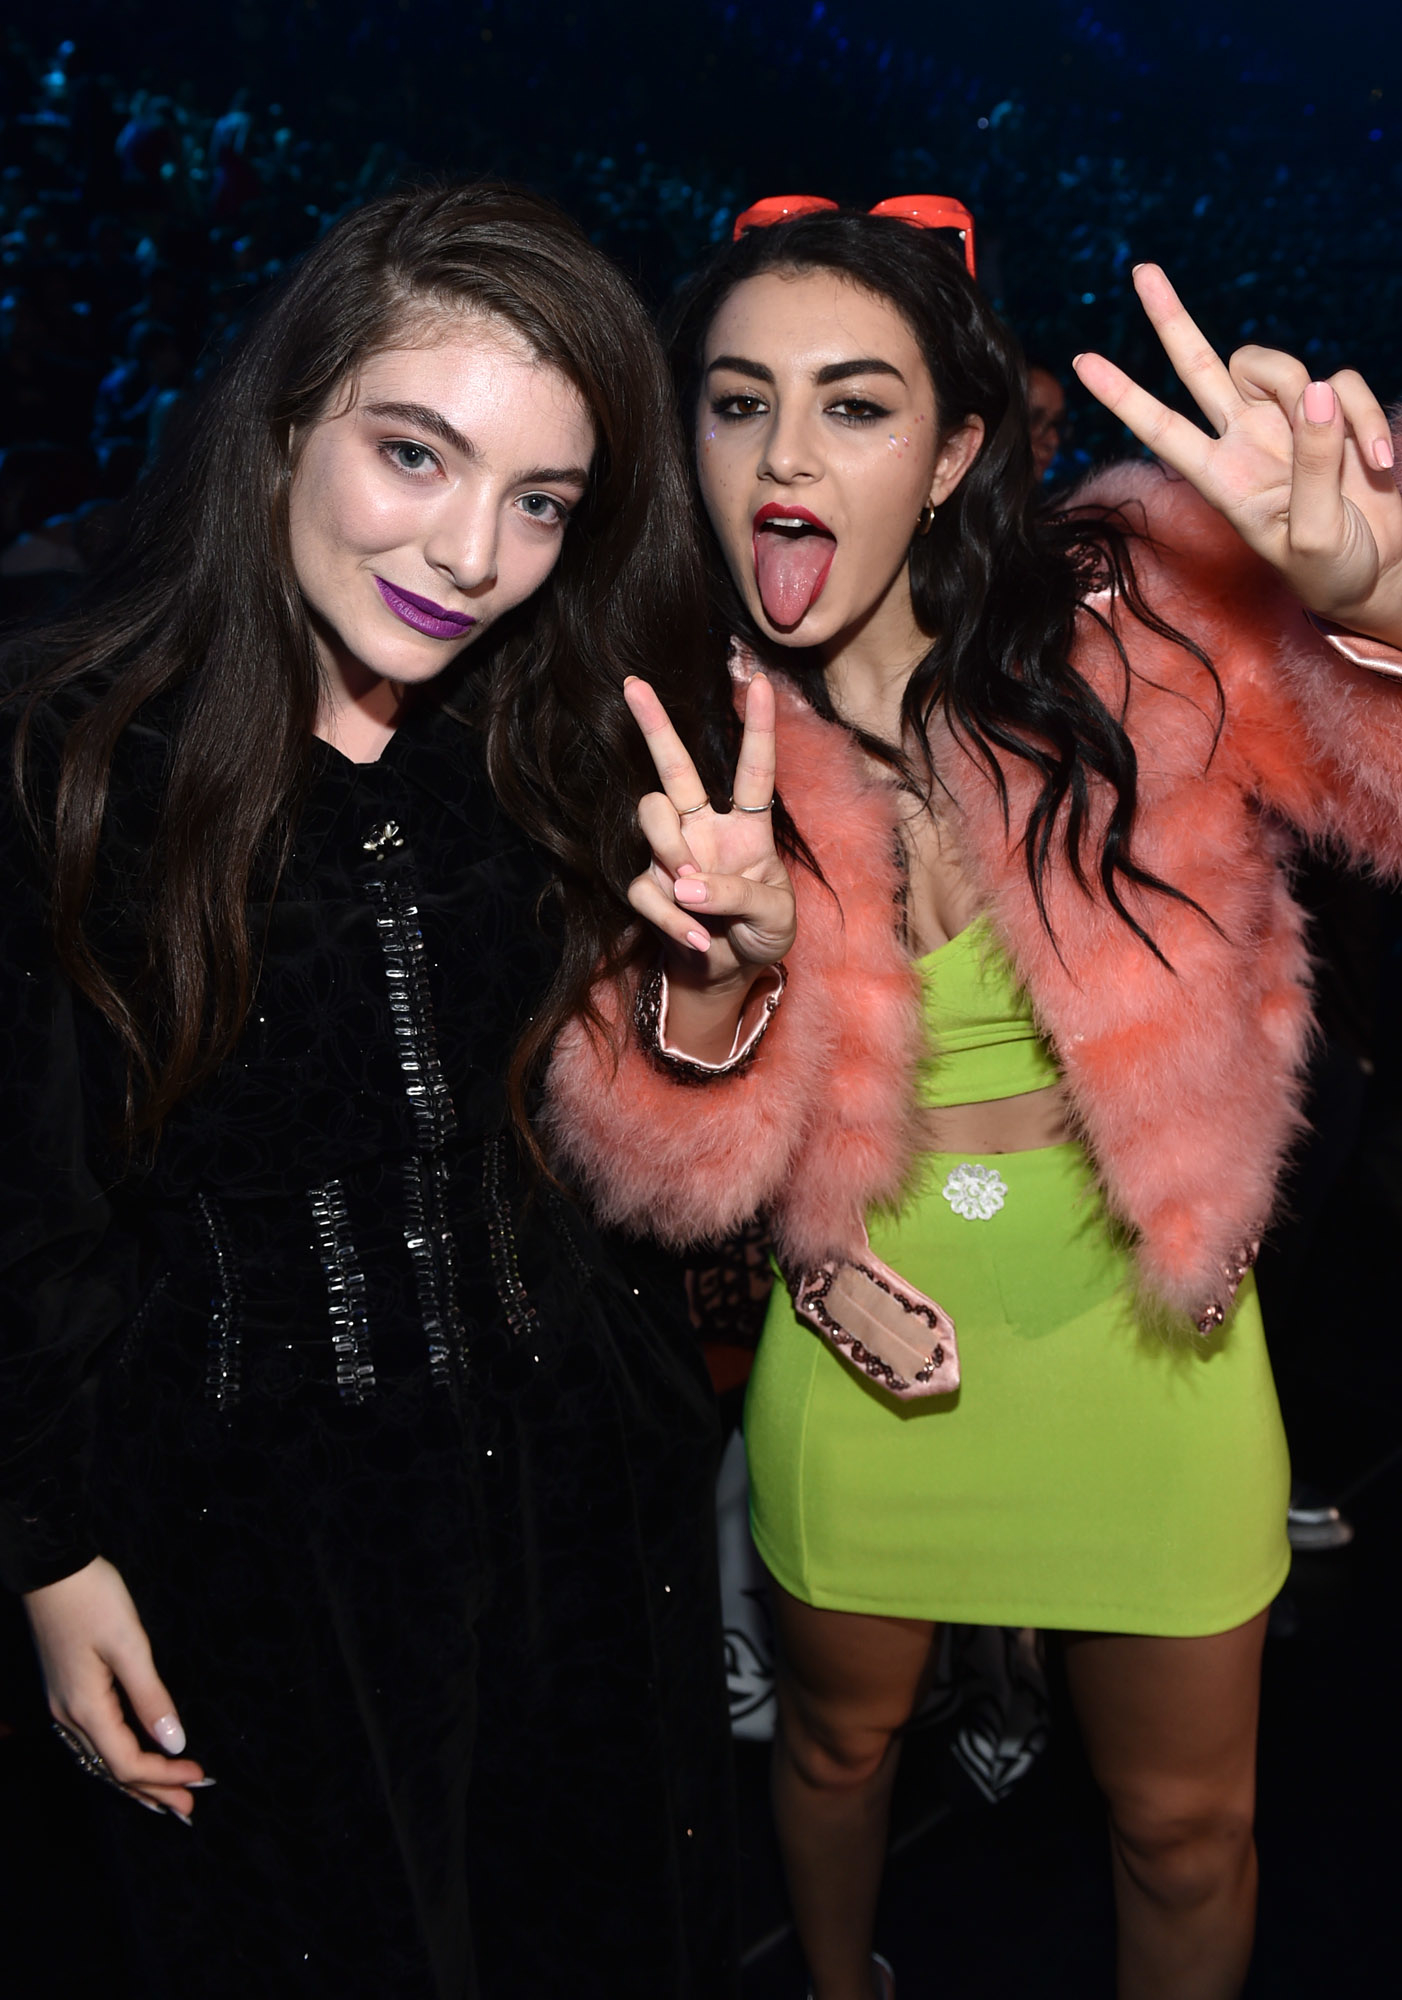 Lorde and Charli xcx posing together at an event. Lorde is wearing a black dress, and Charli xcx is wearing a green dress with a pink fur coat. Both are giving peace signs